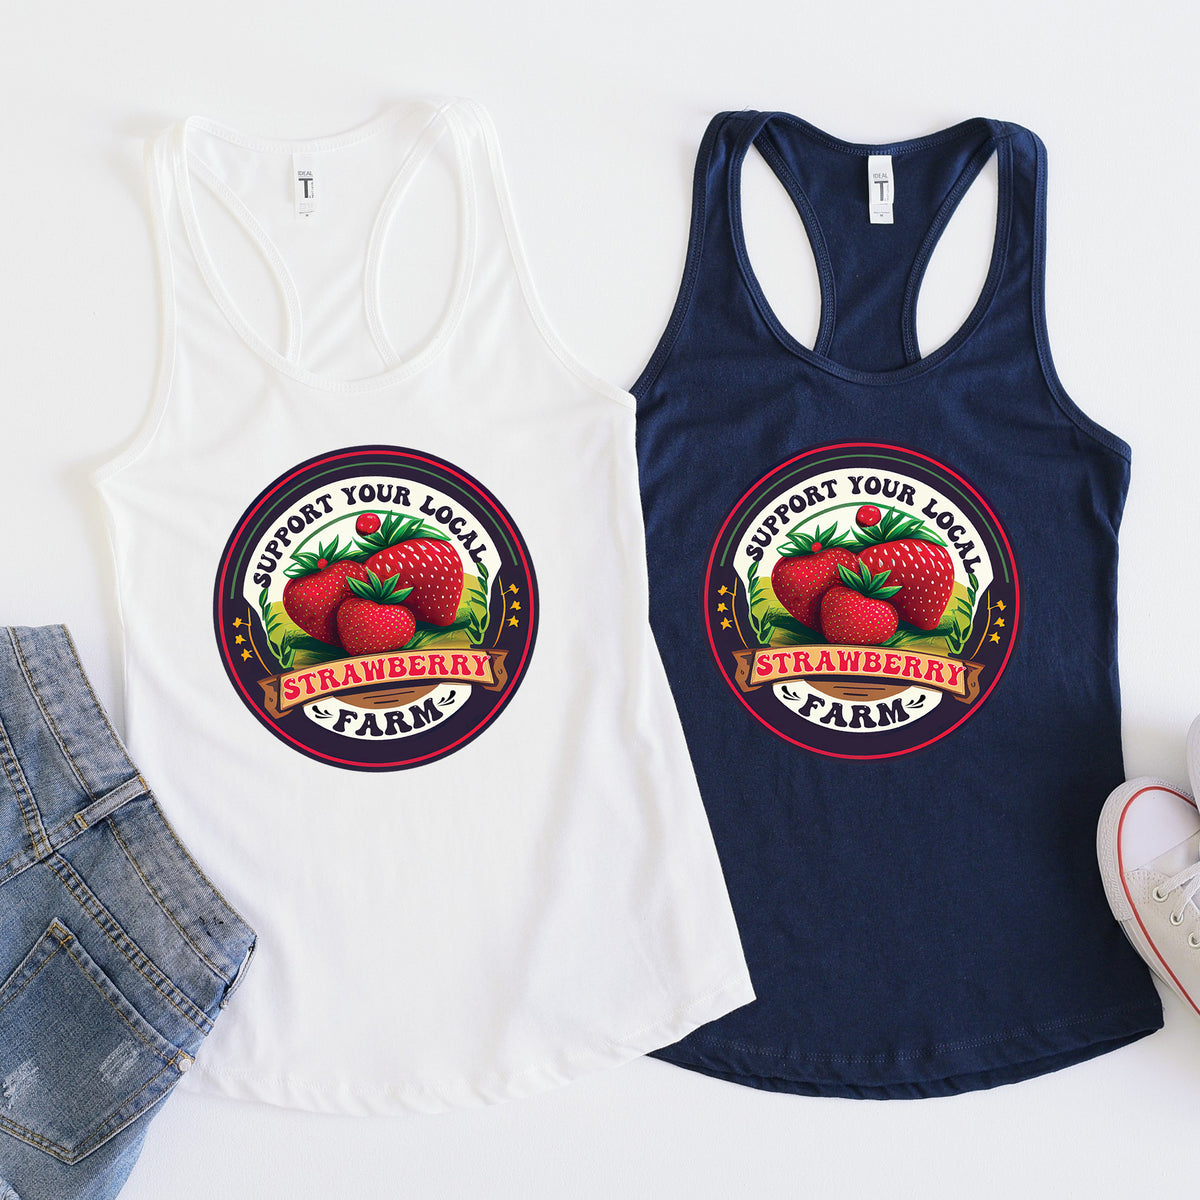 Support Your Local Strawberry Farm Shirt | Women's Navy White Racerback Tank Top